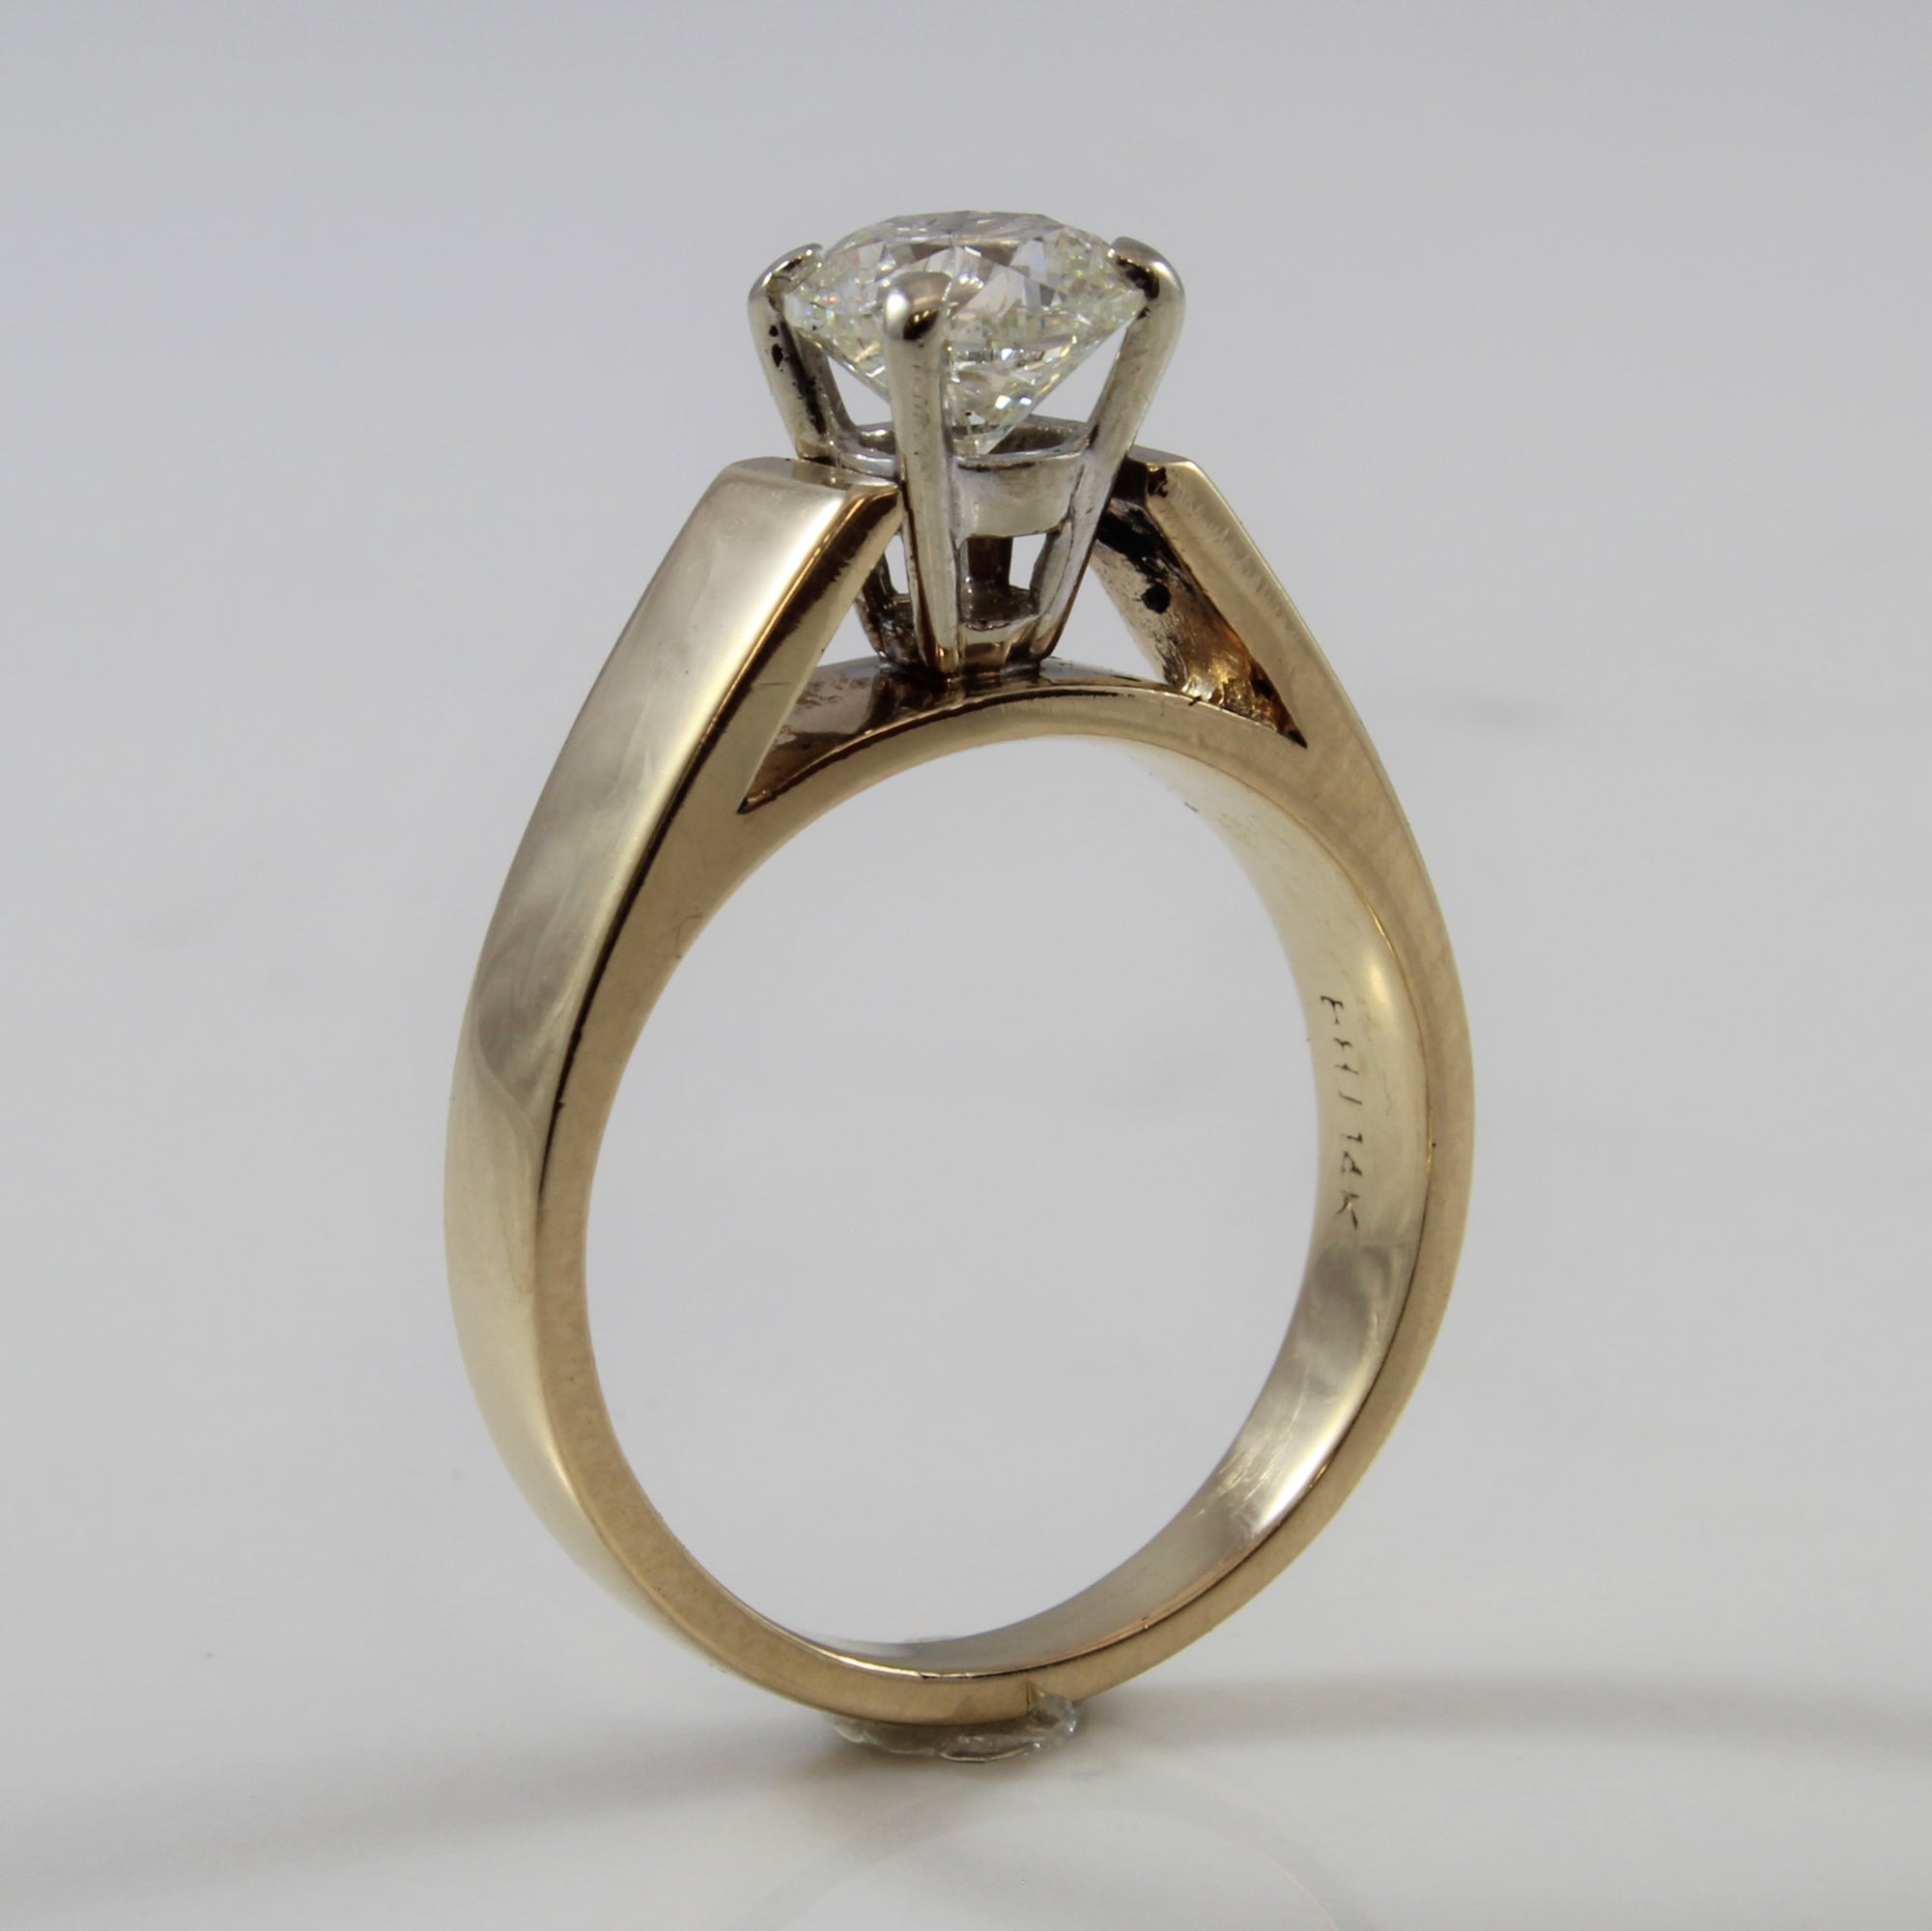 Wide Band Solitaire Diamond Engagement Ring | 0.92 ct | SZ 5.5 |